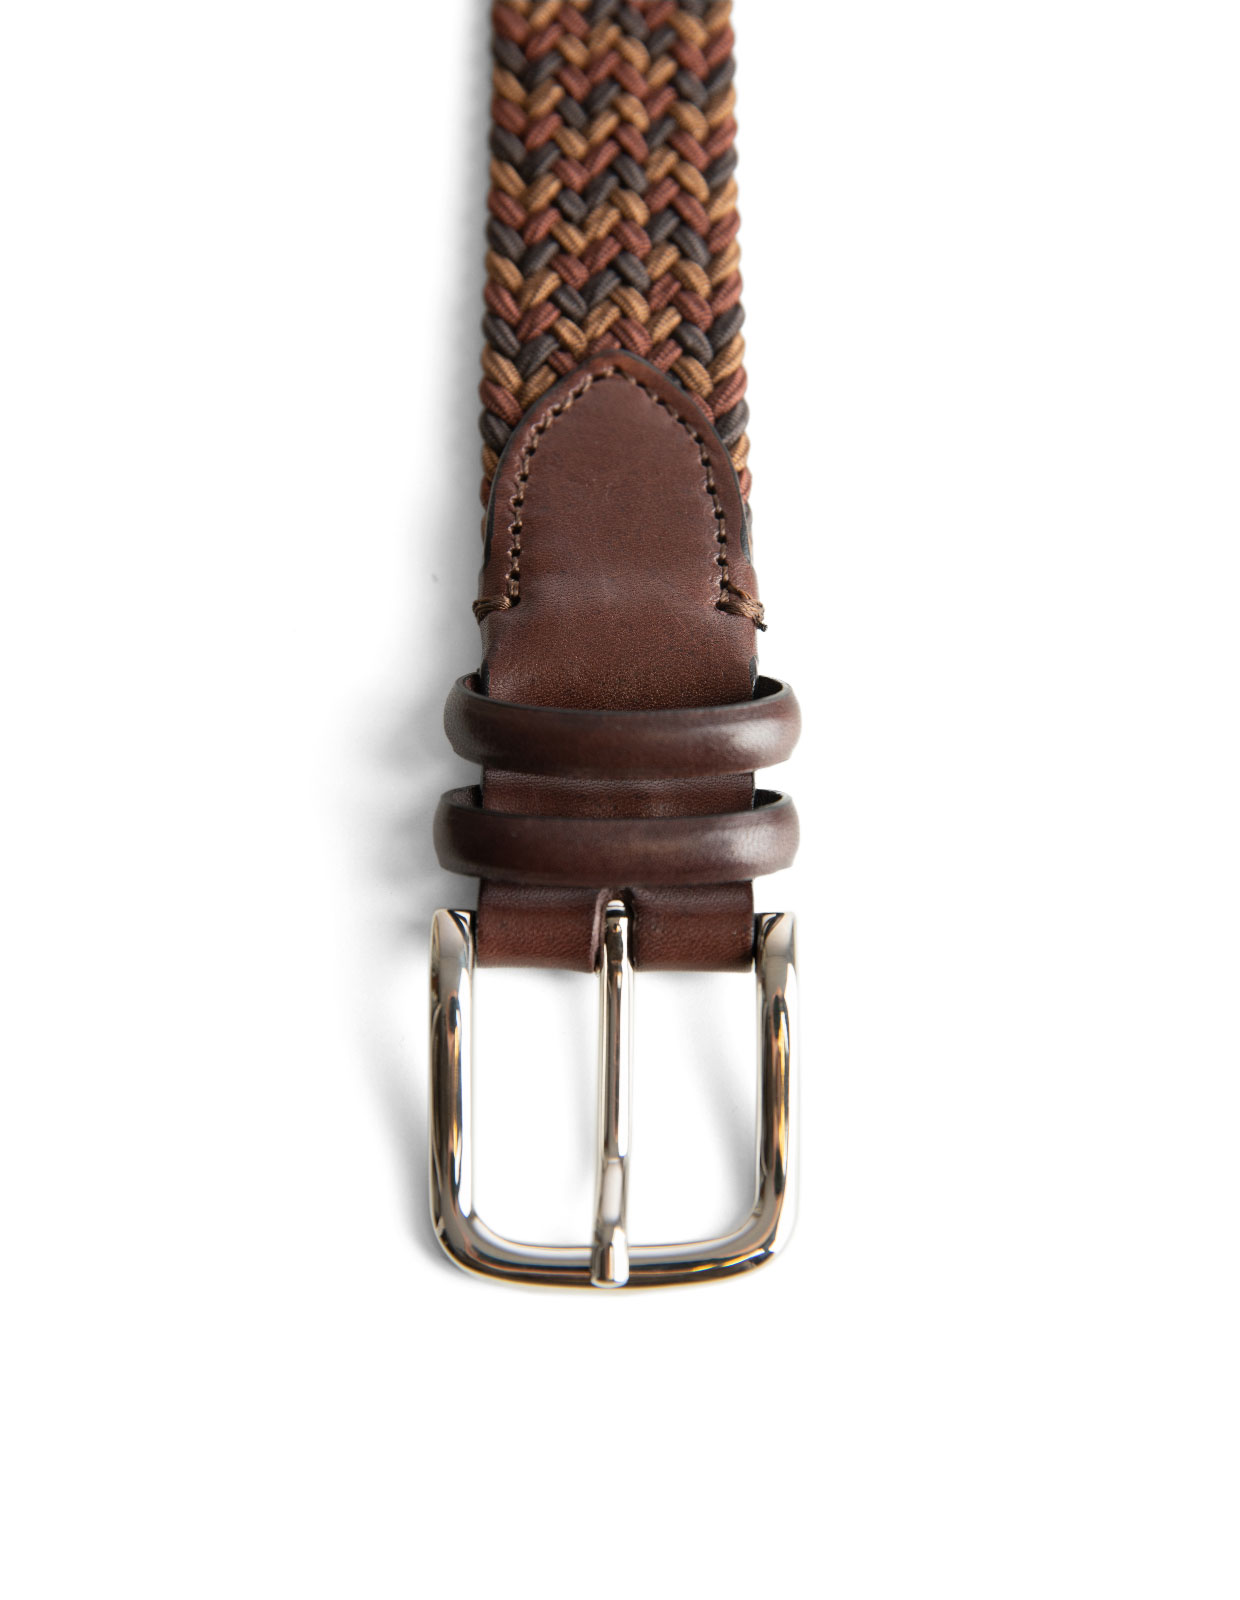 Woven Stretched Rayon Belt Multi Brown Stl 90